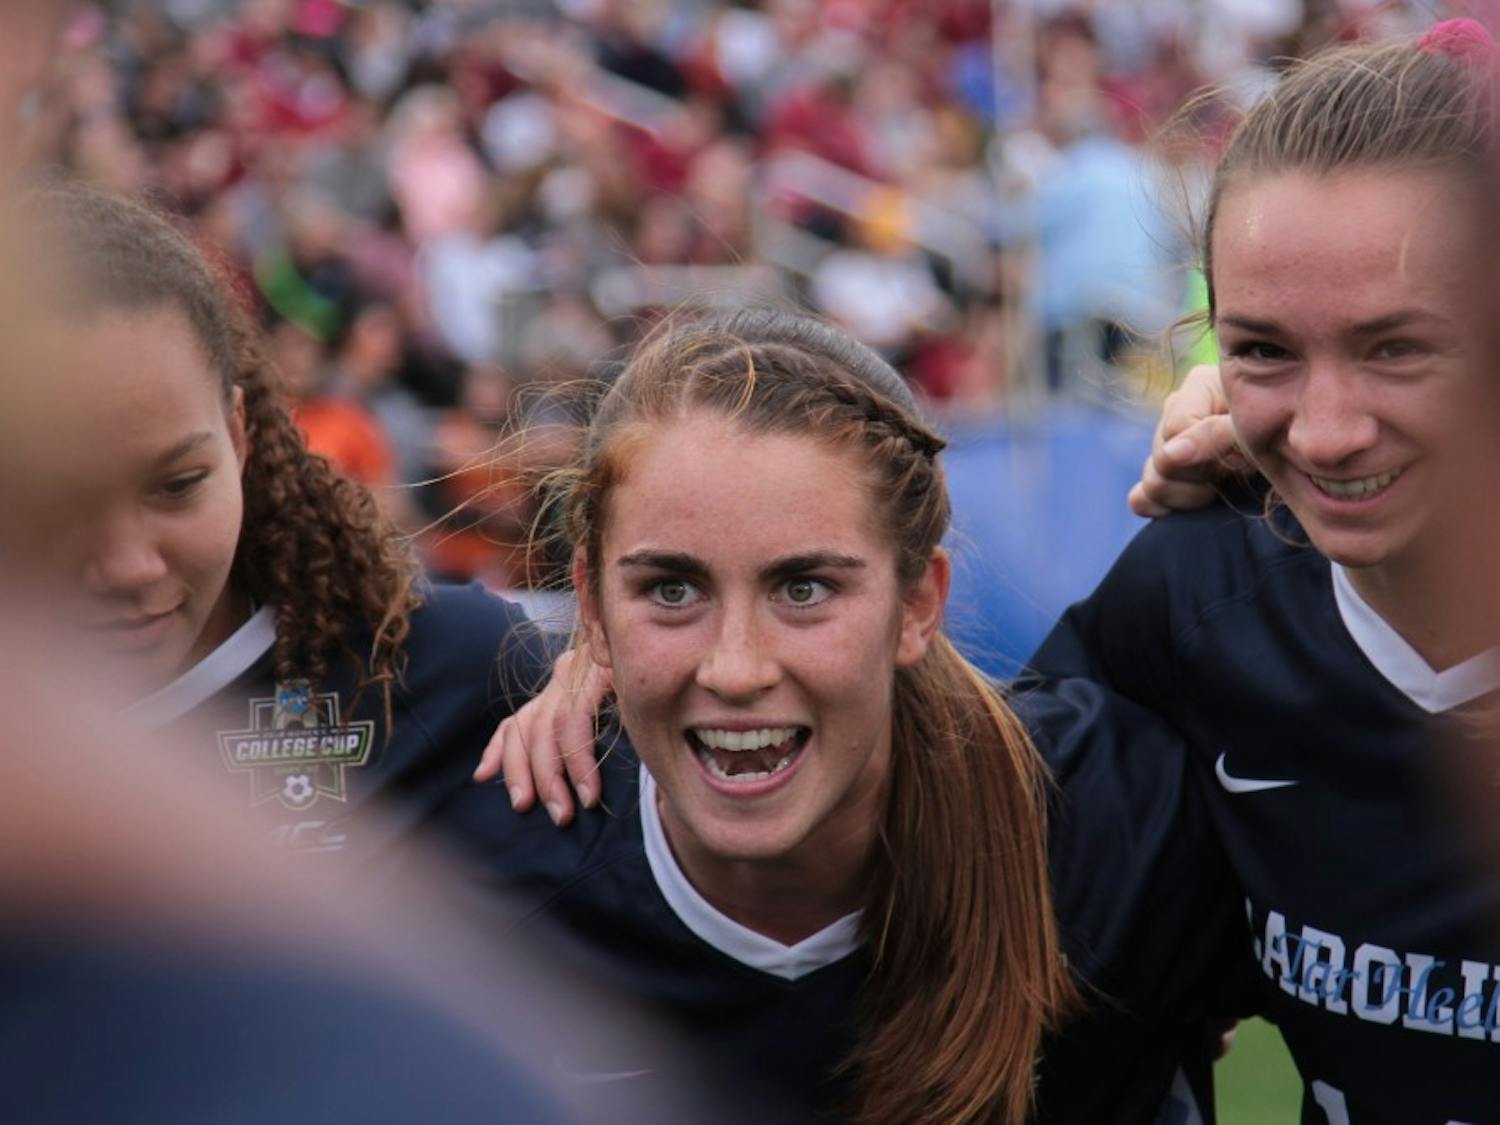 UNC women's soccer lost to FSU 0-1 in the NCAA Championship game at WakeMed Soccer Park on Sunday, Dec. 2, 2018.&nbsp;